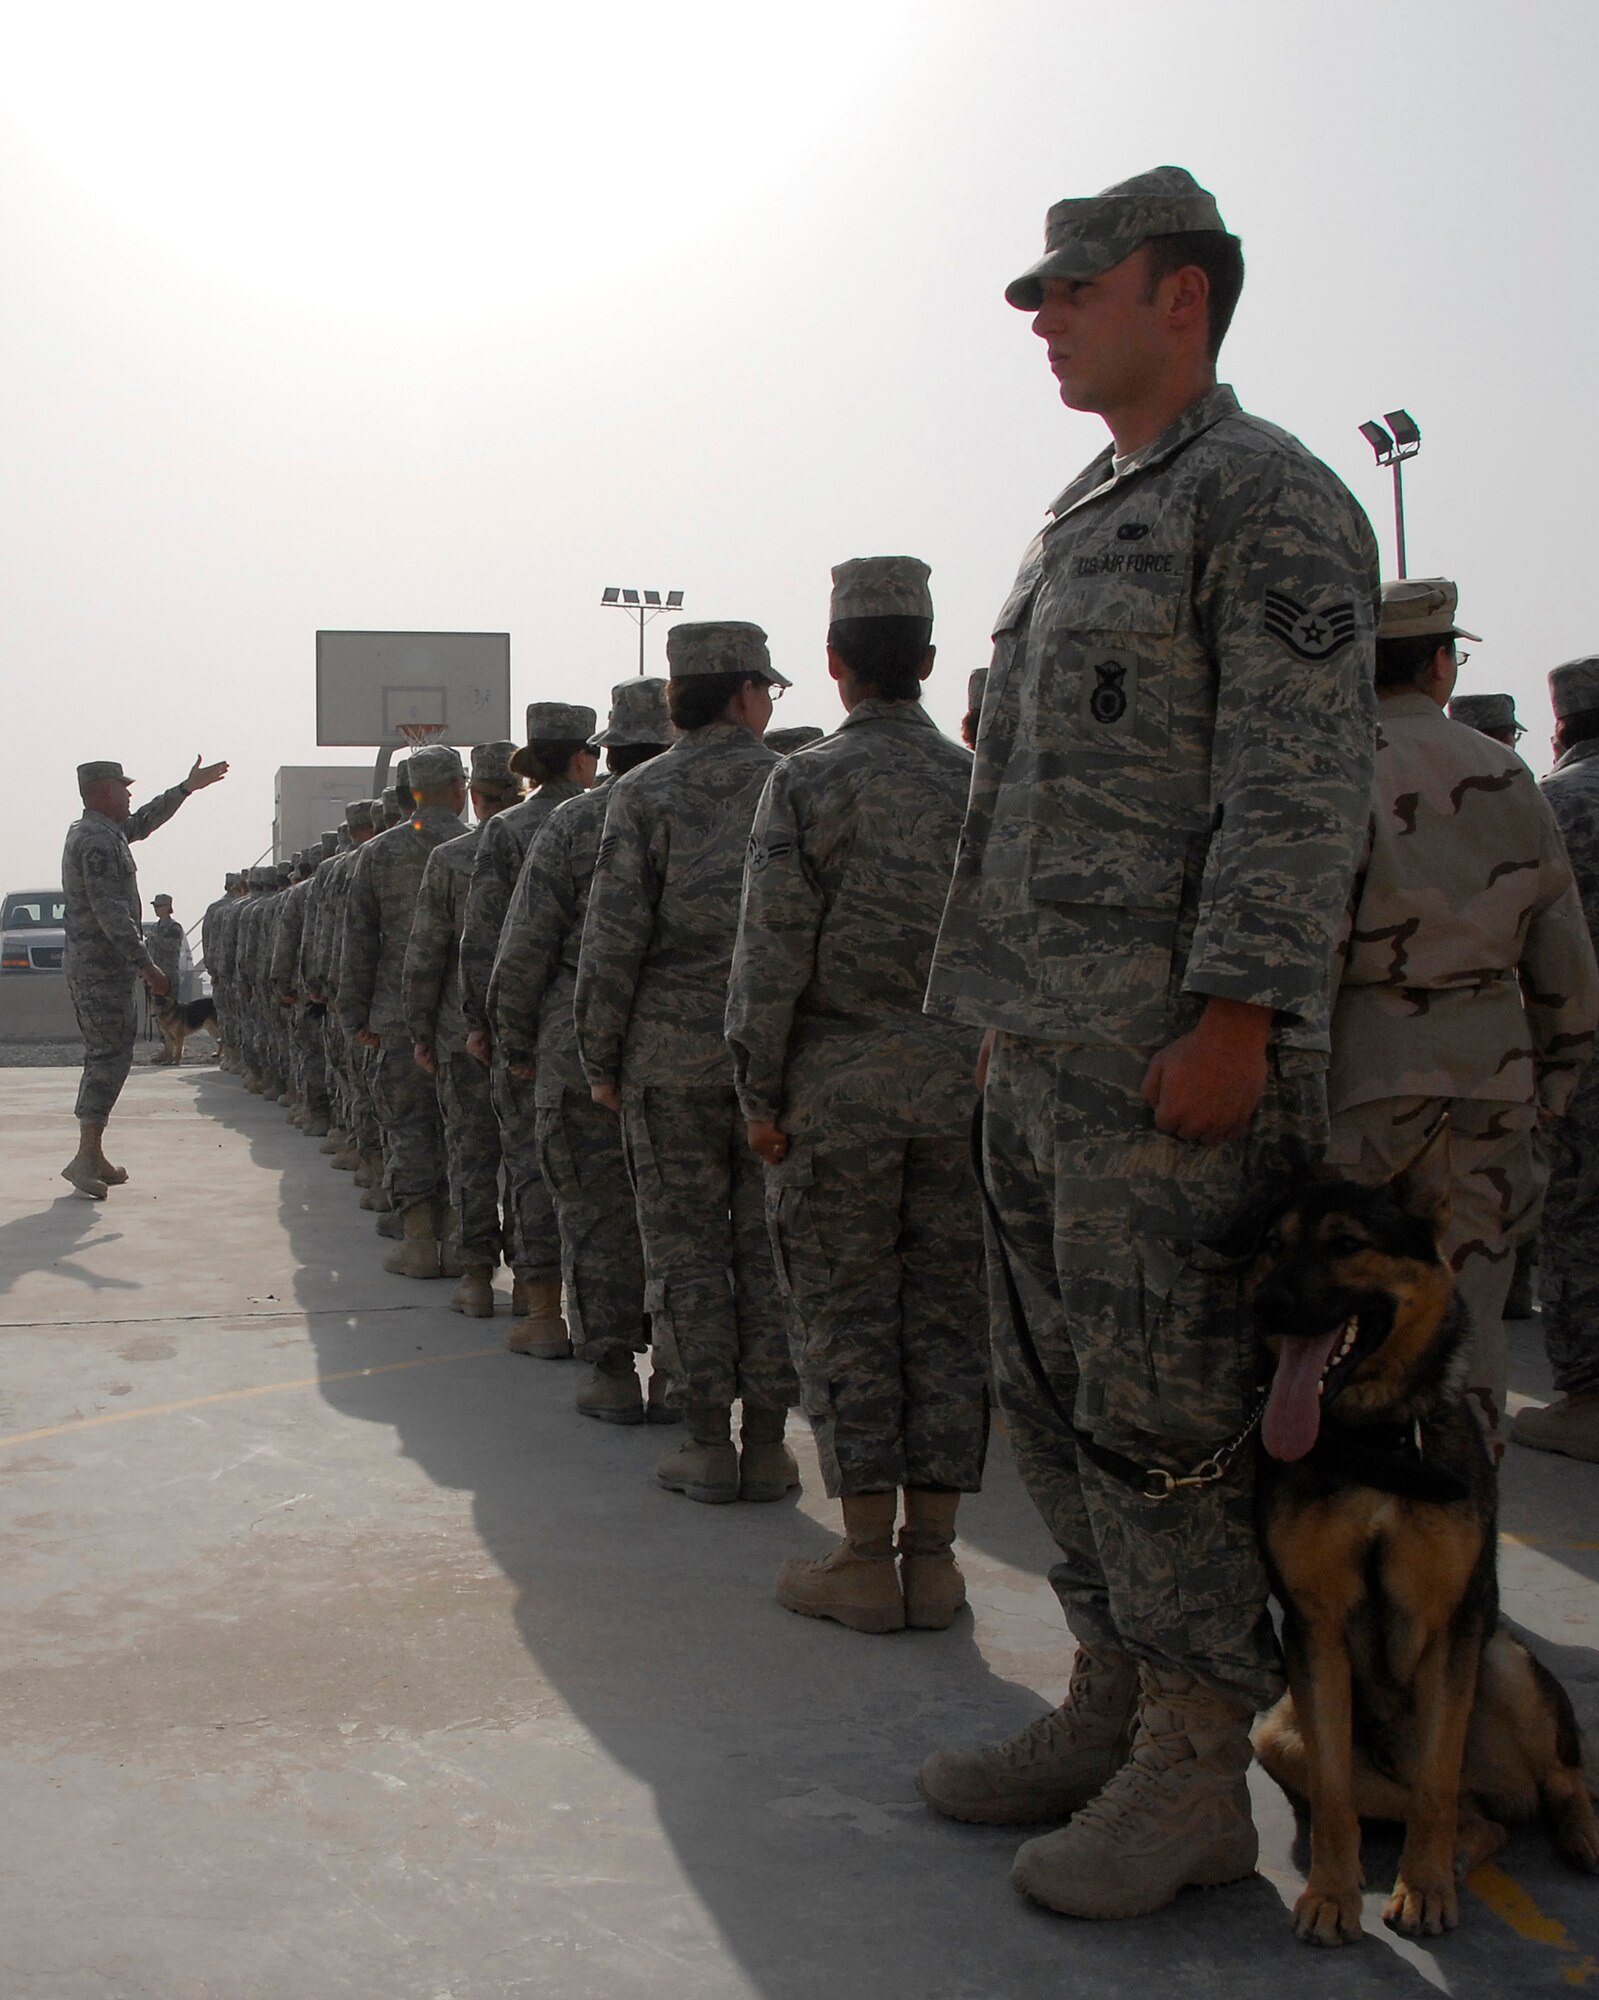 SOUTHWEST ASIA – Staff Sgt. Andrew Freytag, a K-9 handler, and Bady, his military working dog partner from the 386th Expeditionary Security Forces Squadron, keep eyes-front while Senior Master Sgt. Paul Yecke, the first sergeant for the 386th Expeditionary Mission Support Group, sizes up a formation of more than 270 Airmen for an expedited retreat ceremony April 25, 2008, at an air base in the Persian Gulf Region. (U.S. Air Force photo/Tech. Sgt. Michael O’Connor)